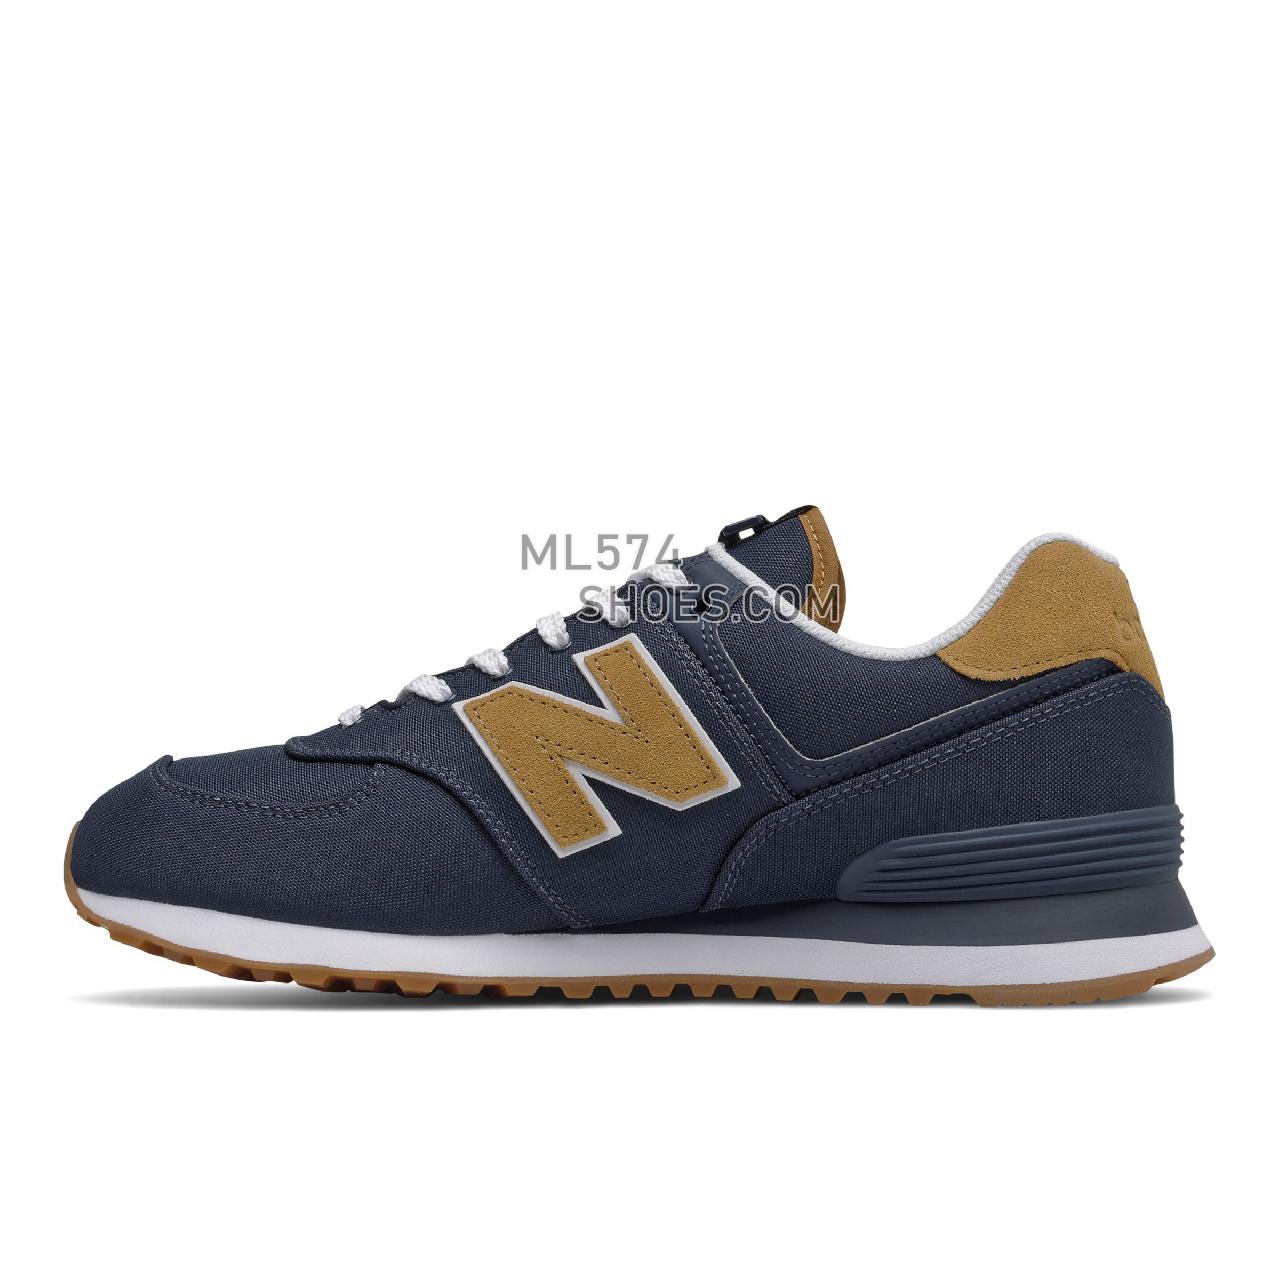 New Balance 574v2 - Men's Classic Sneakers - Natural Indigo with Workwear - ML574BC2